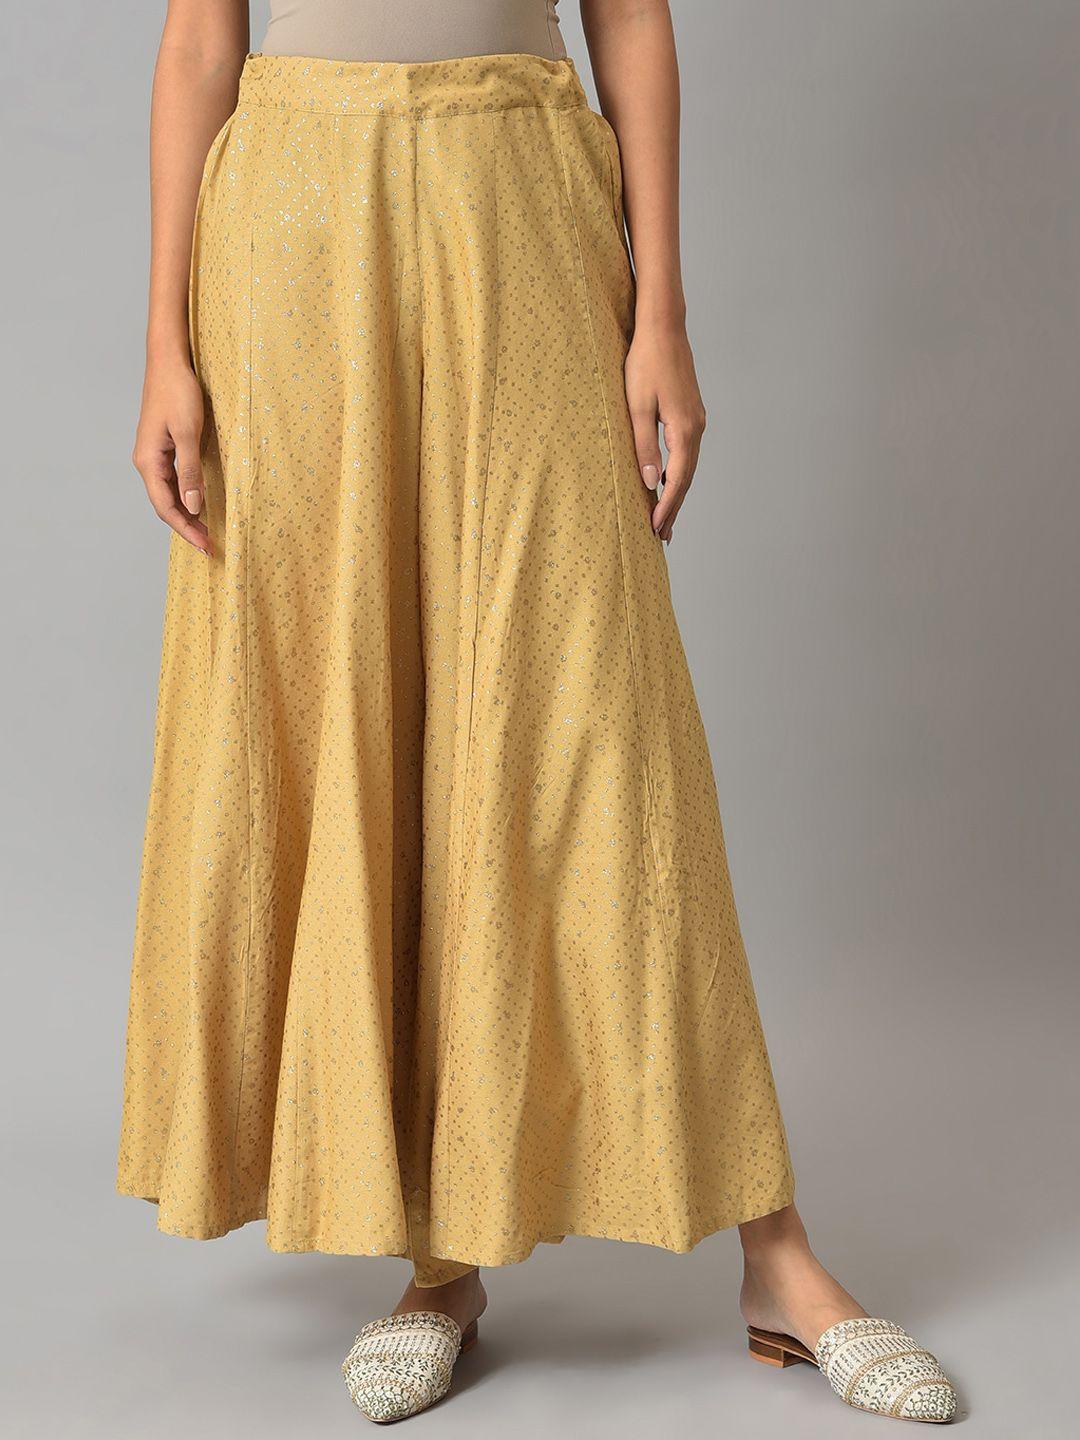 w-women-golden-colored-glitter-printed-flared-maxi-skirts